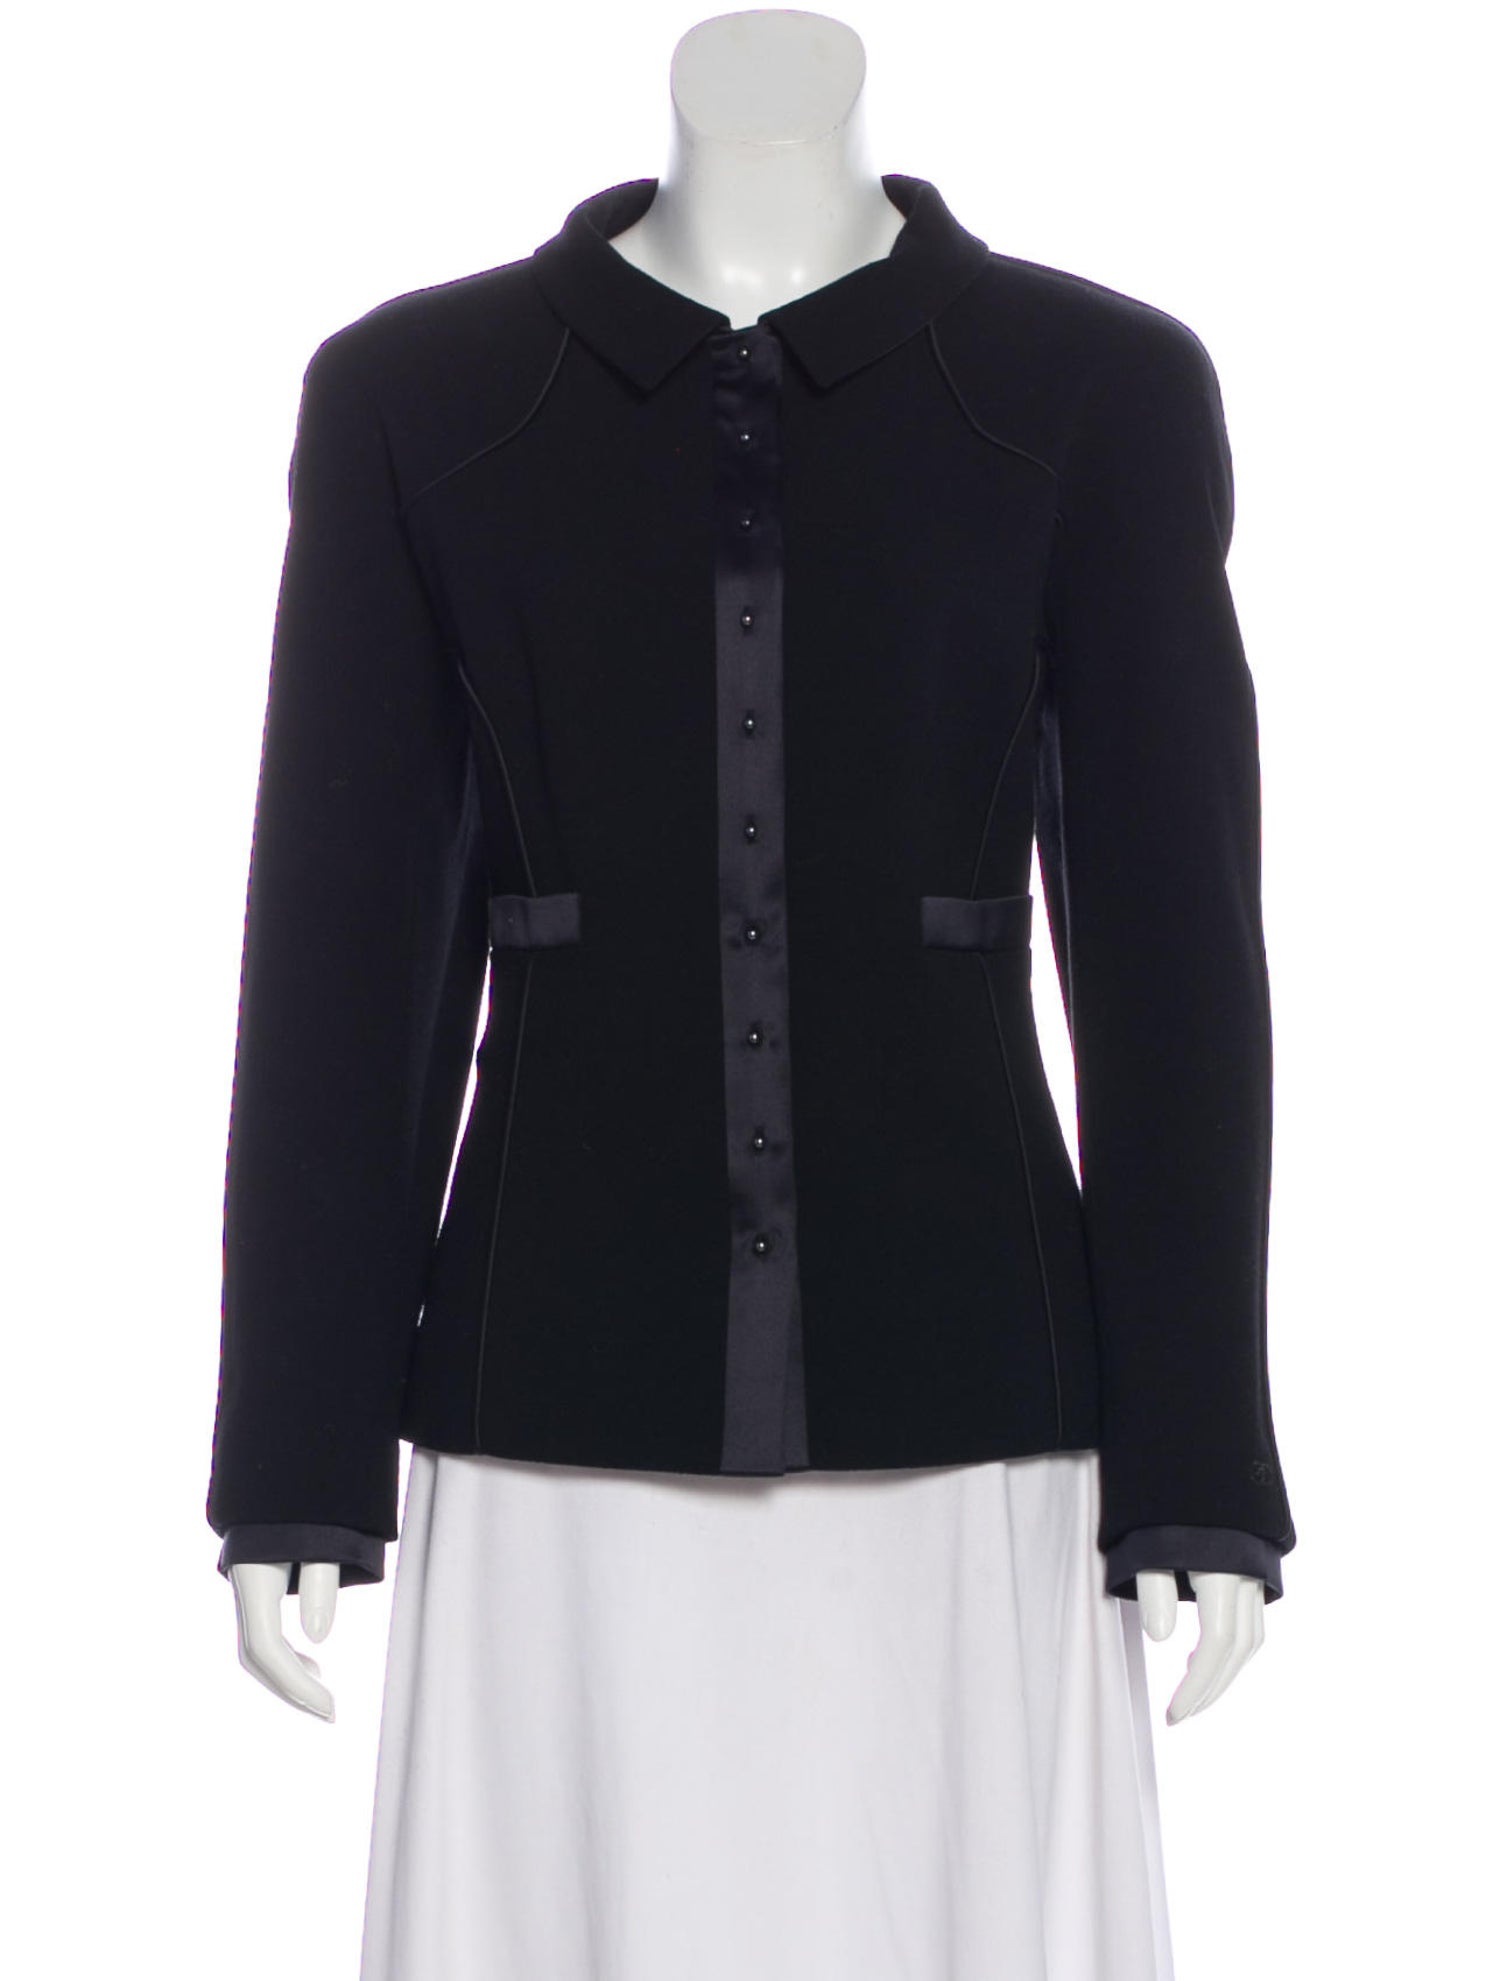 Chanel Jackets for the Holidays - Shopping and Info